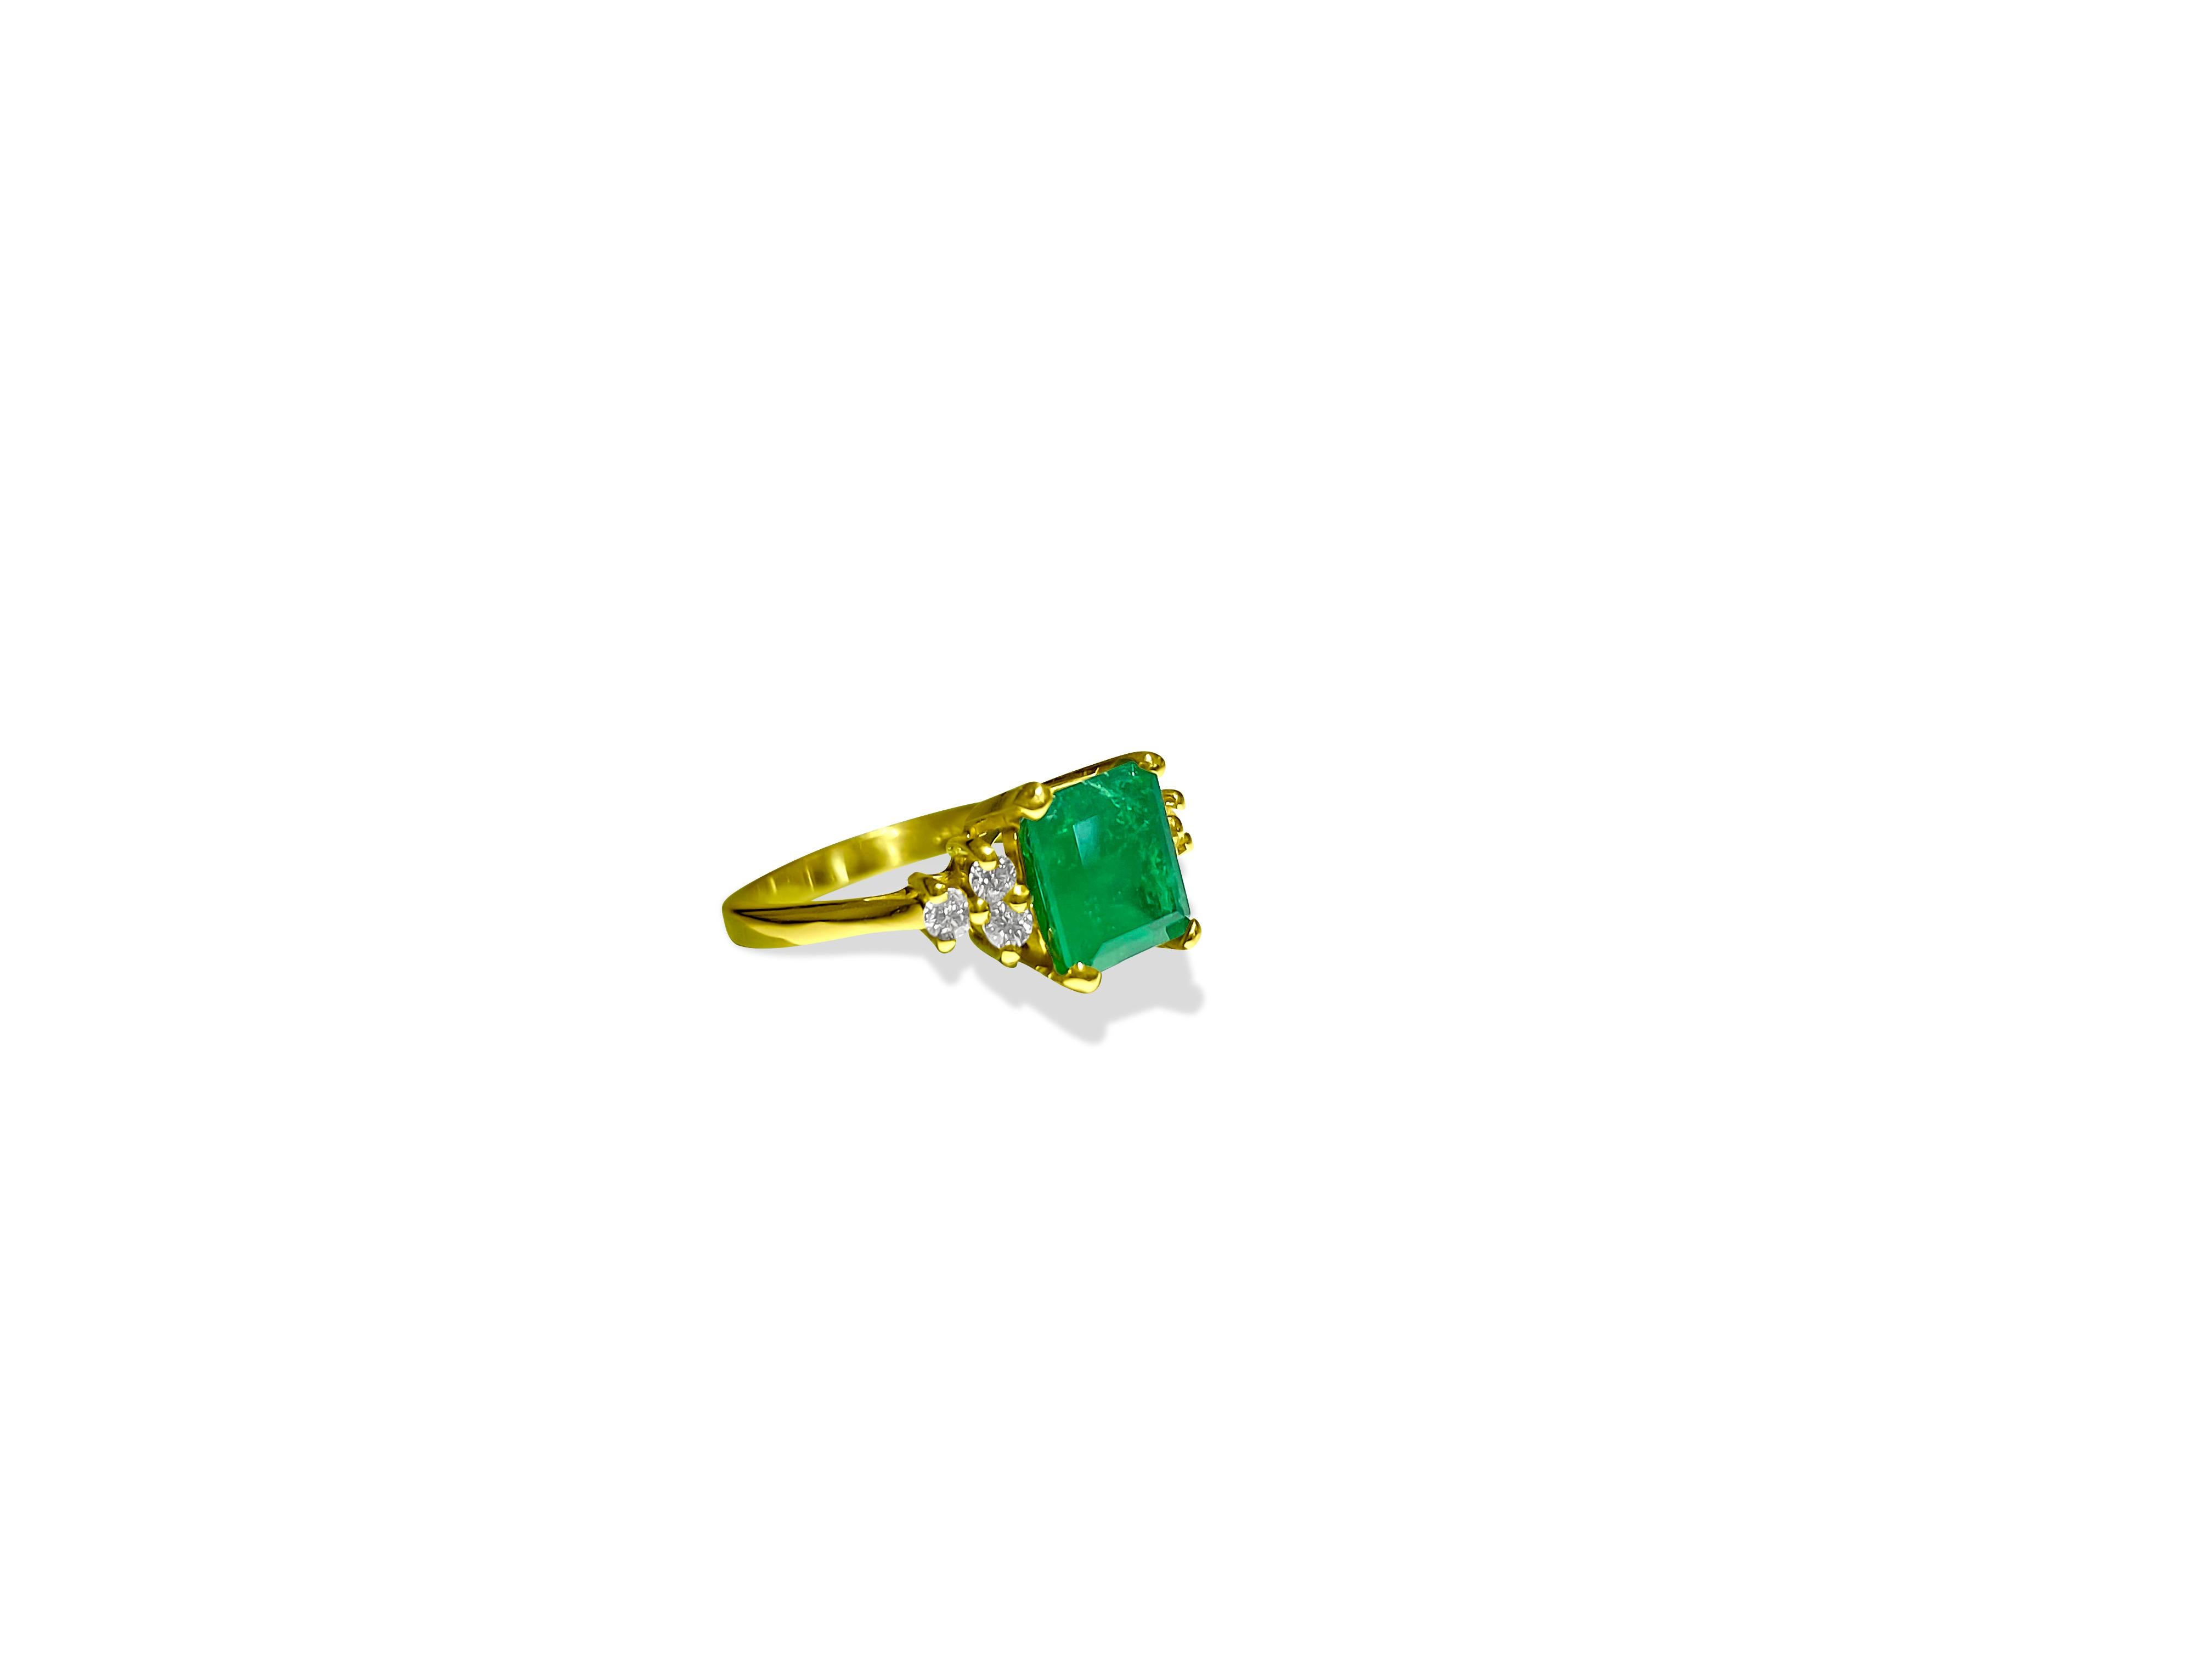 4.25 Carat Natural Emerald Diamond Cocktail Insert Ring 14 Karat Yellow Gold In Excellent Condition For Sale In Miami, FL